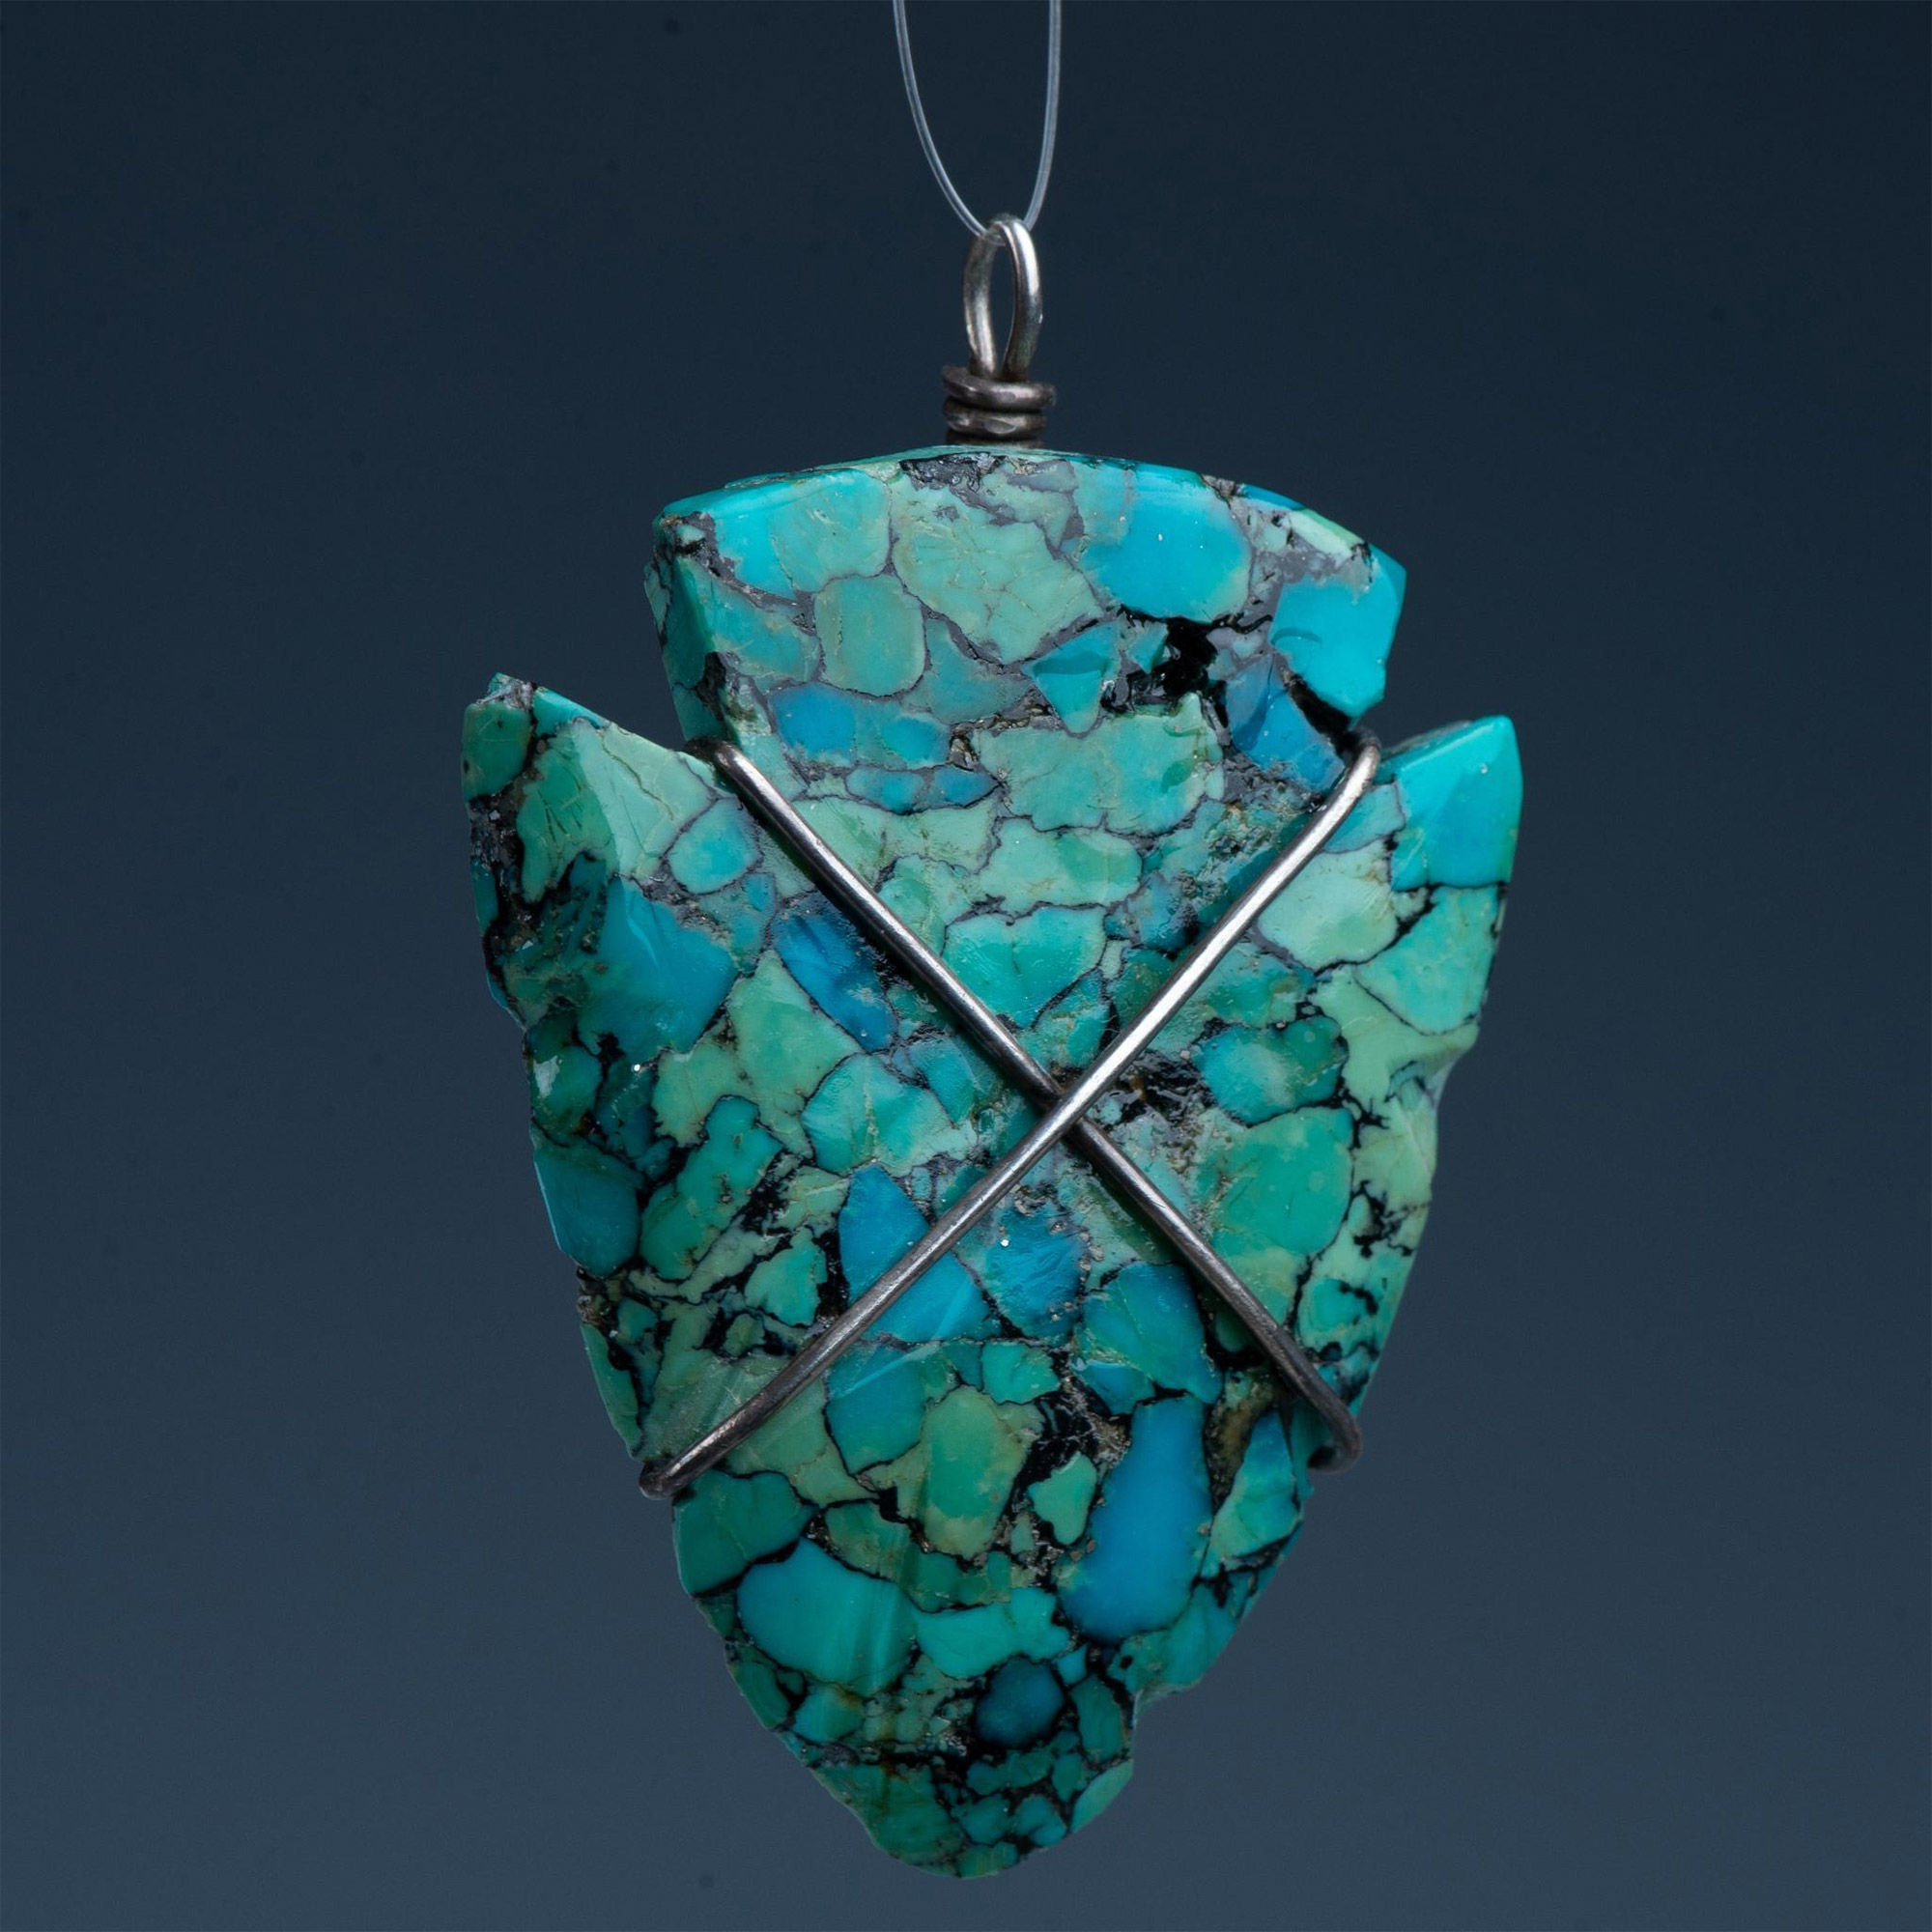 Southwestern Carved Turquoise Arrow Head Pendant - Image 4 of 4